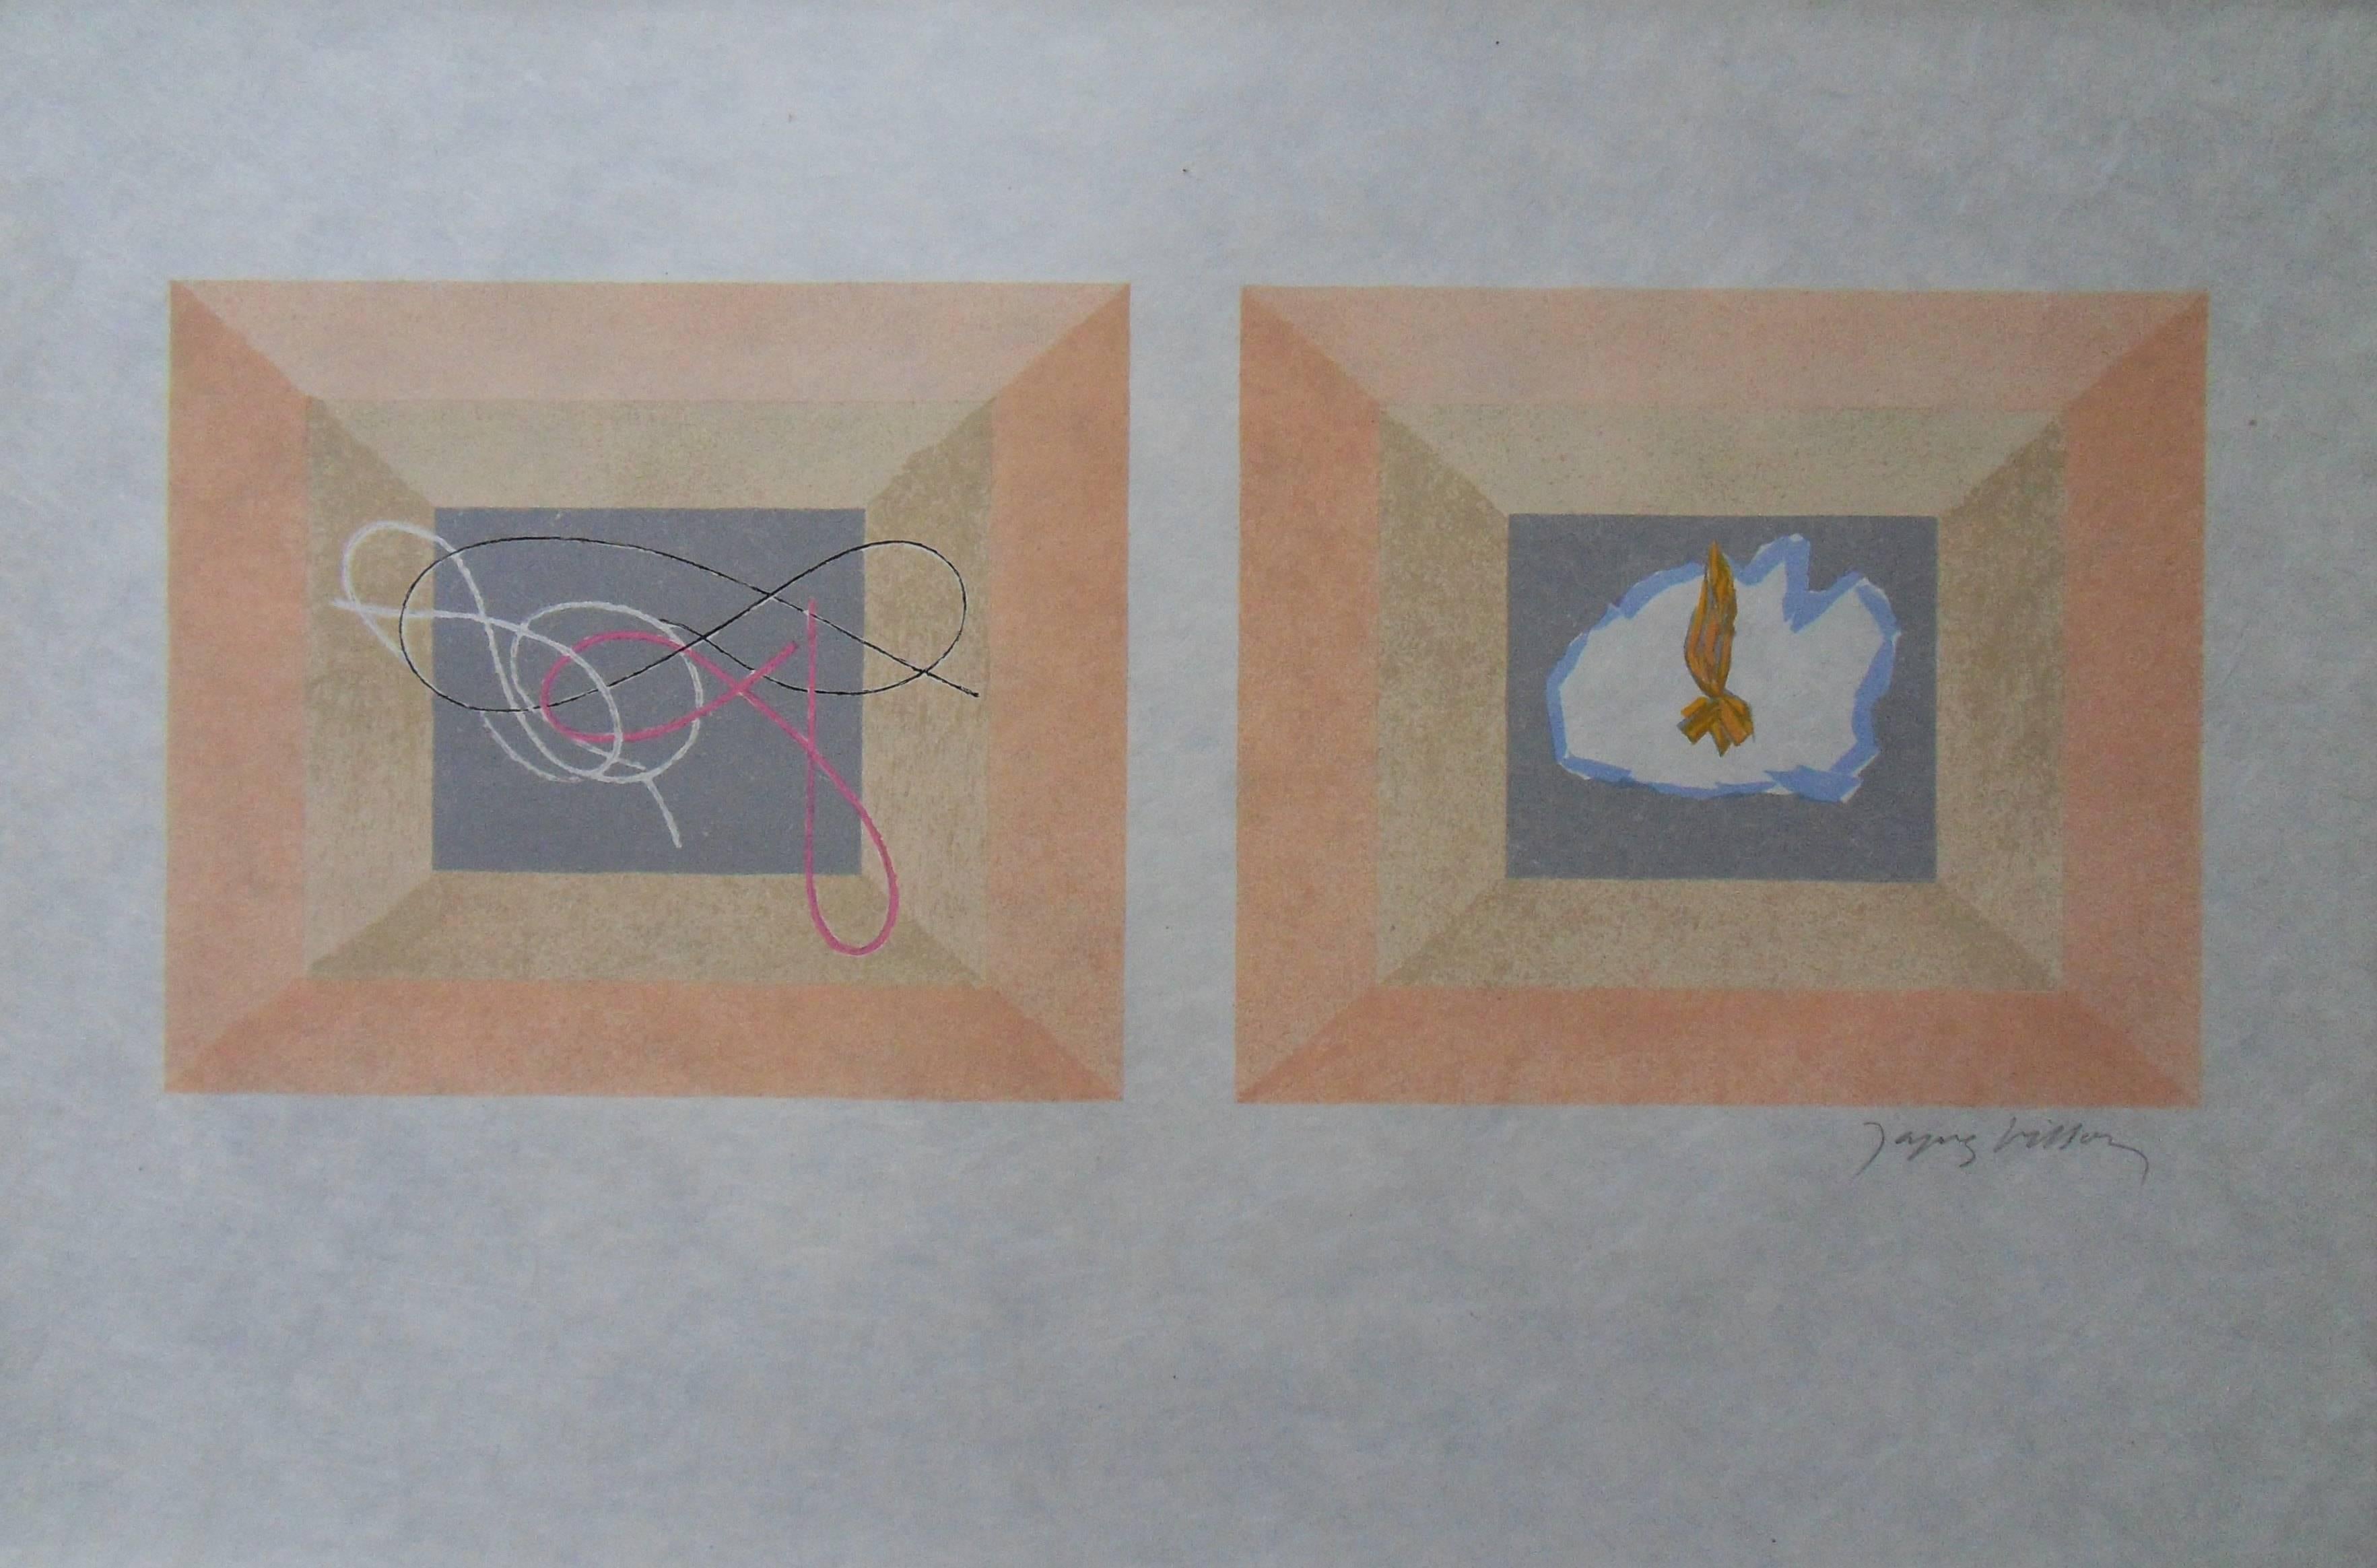 Jacques Villon Abstract Print - Air and Fire - Signed lithograph - Mourlot 1953